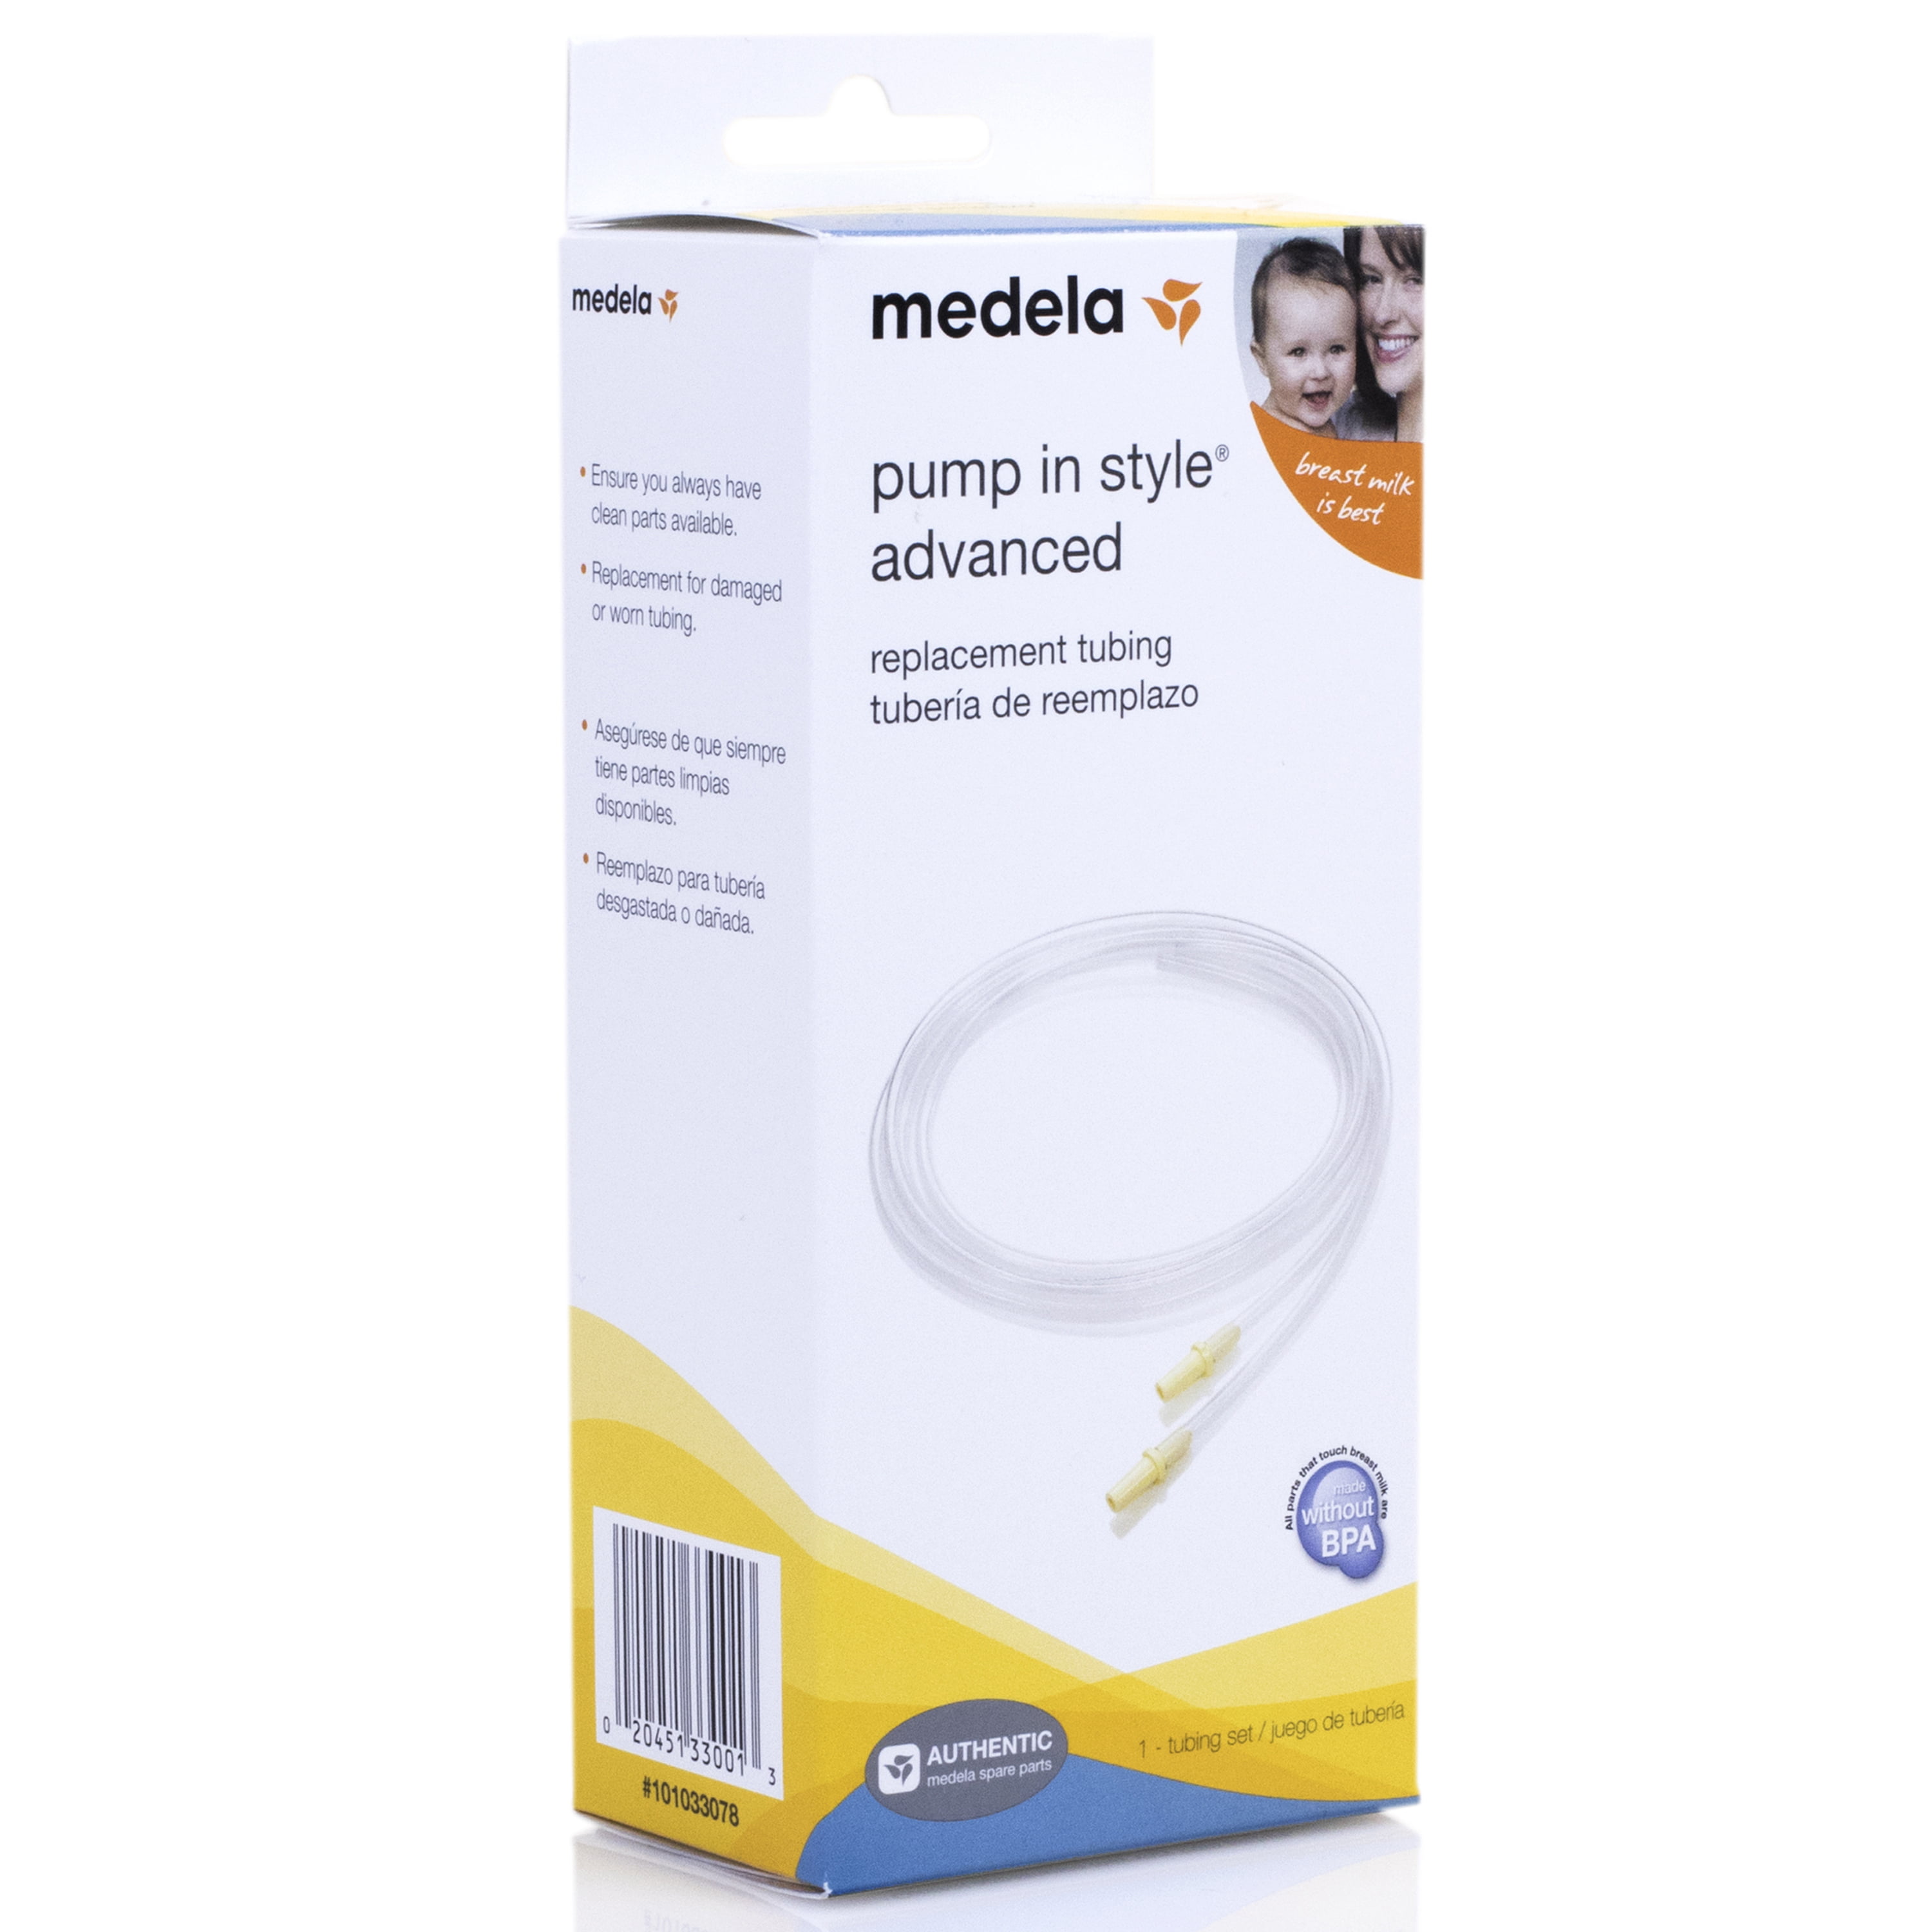 2 Tubes and 6 Membranes for Medela Pump In Style Advanced Breast Pum... Tubing 